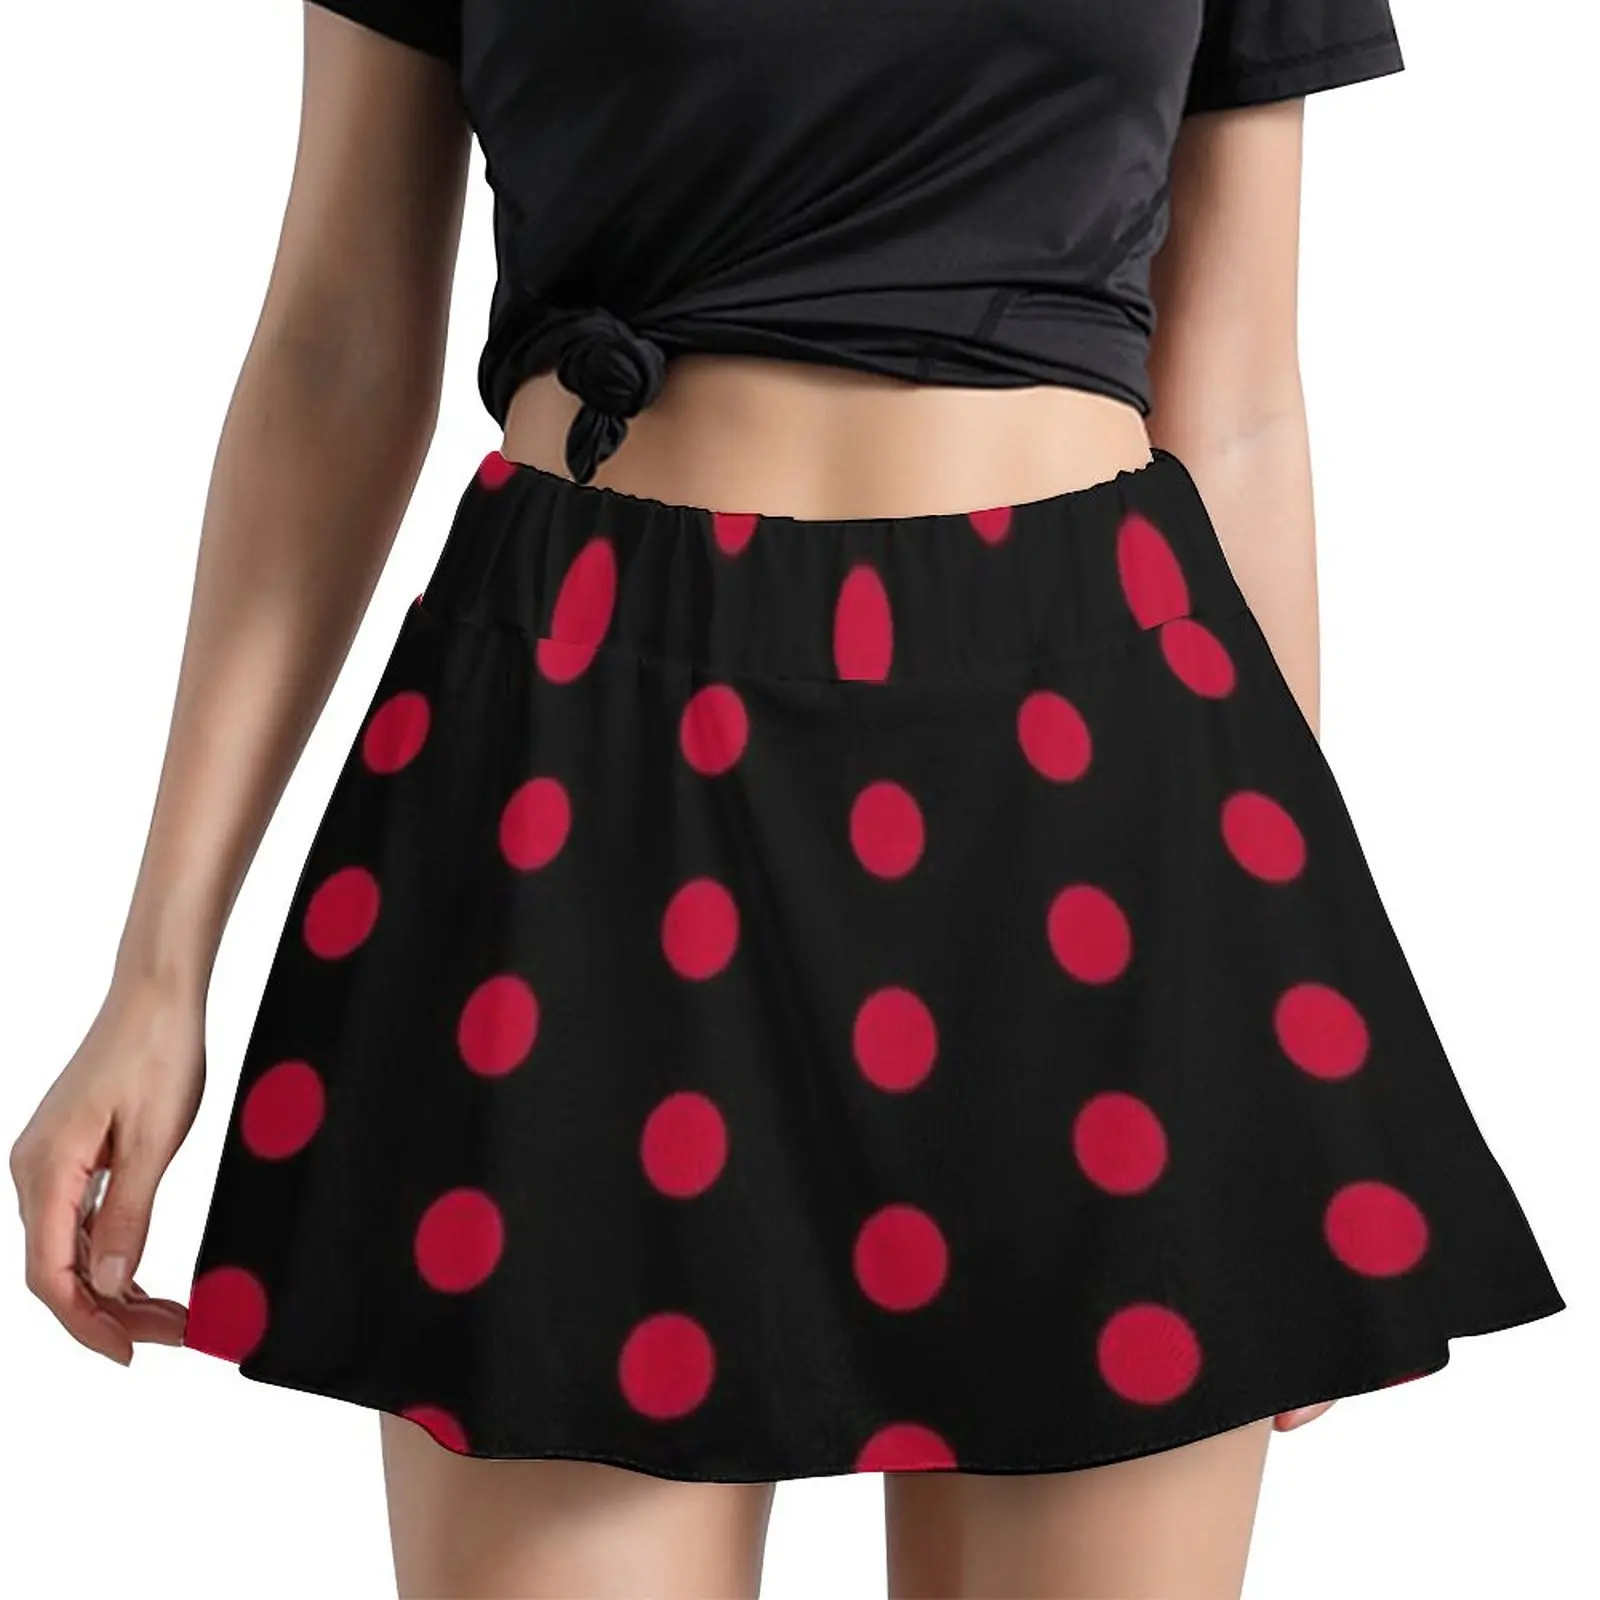 

Black with Red Polka Dot Skirt Dotted 70S Vintage Mini Skirts Summer High Waist Graphic Street Fashion Casual Skirt Big Size